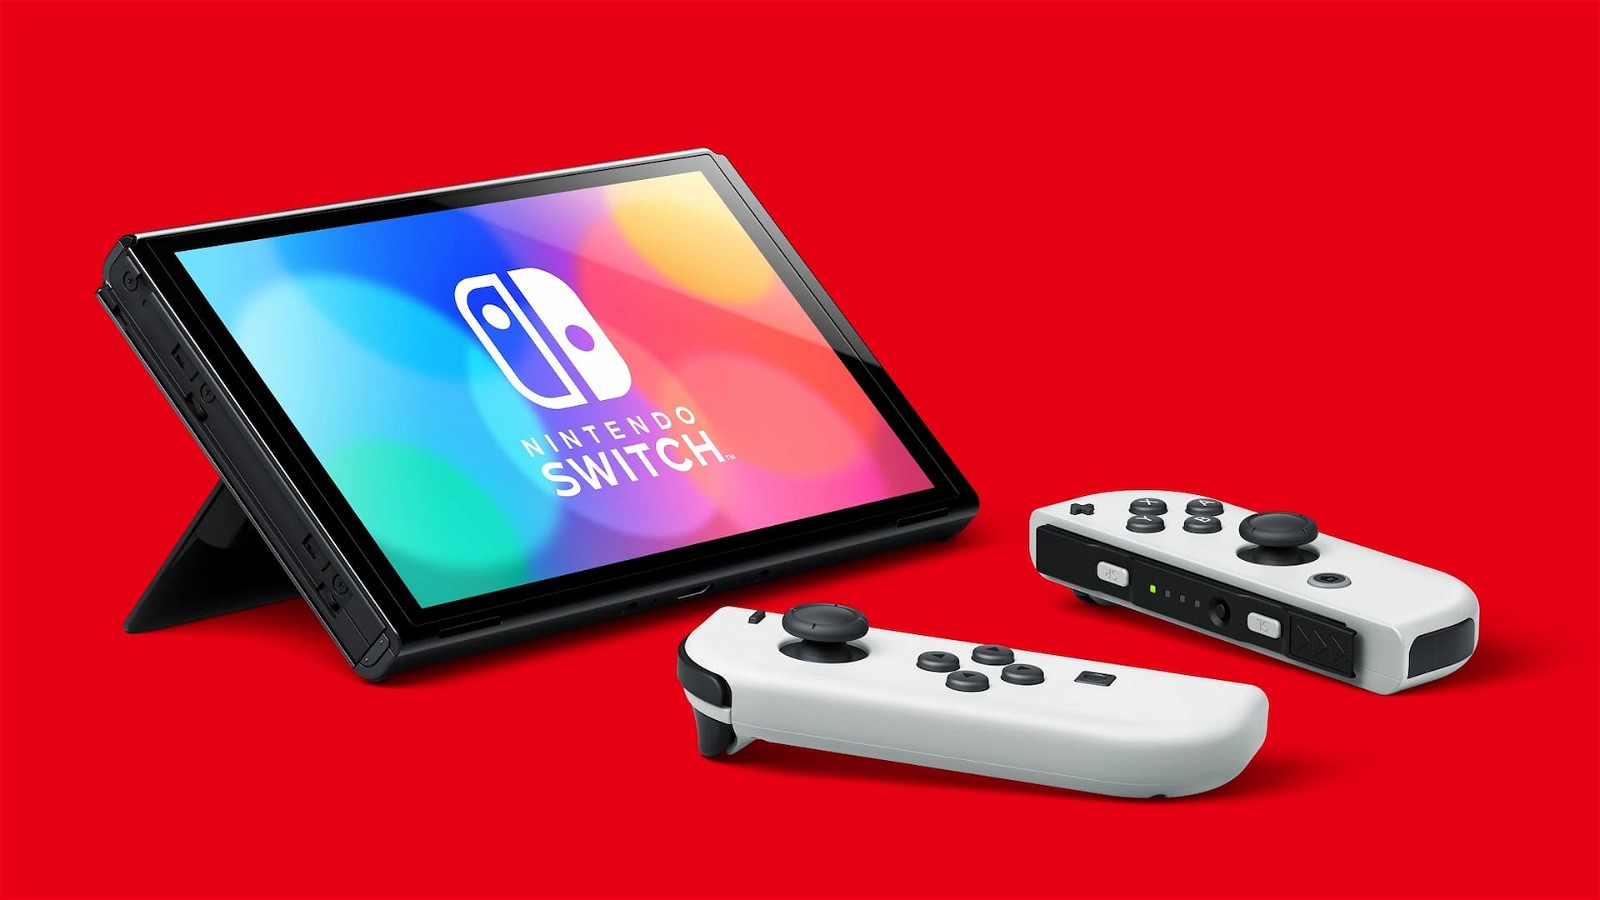 Nintendo Switch is closer to PS4/ Xbox one in performance